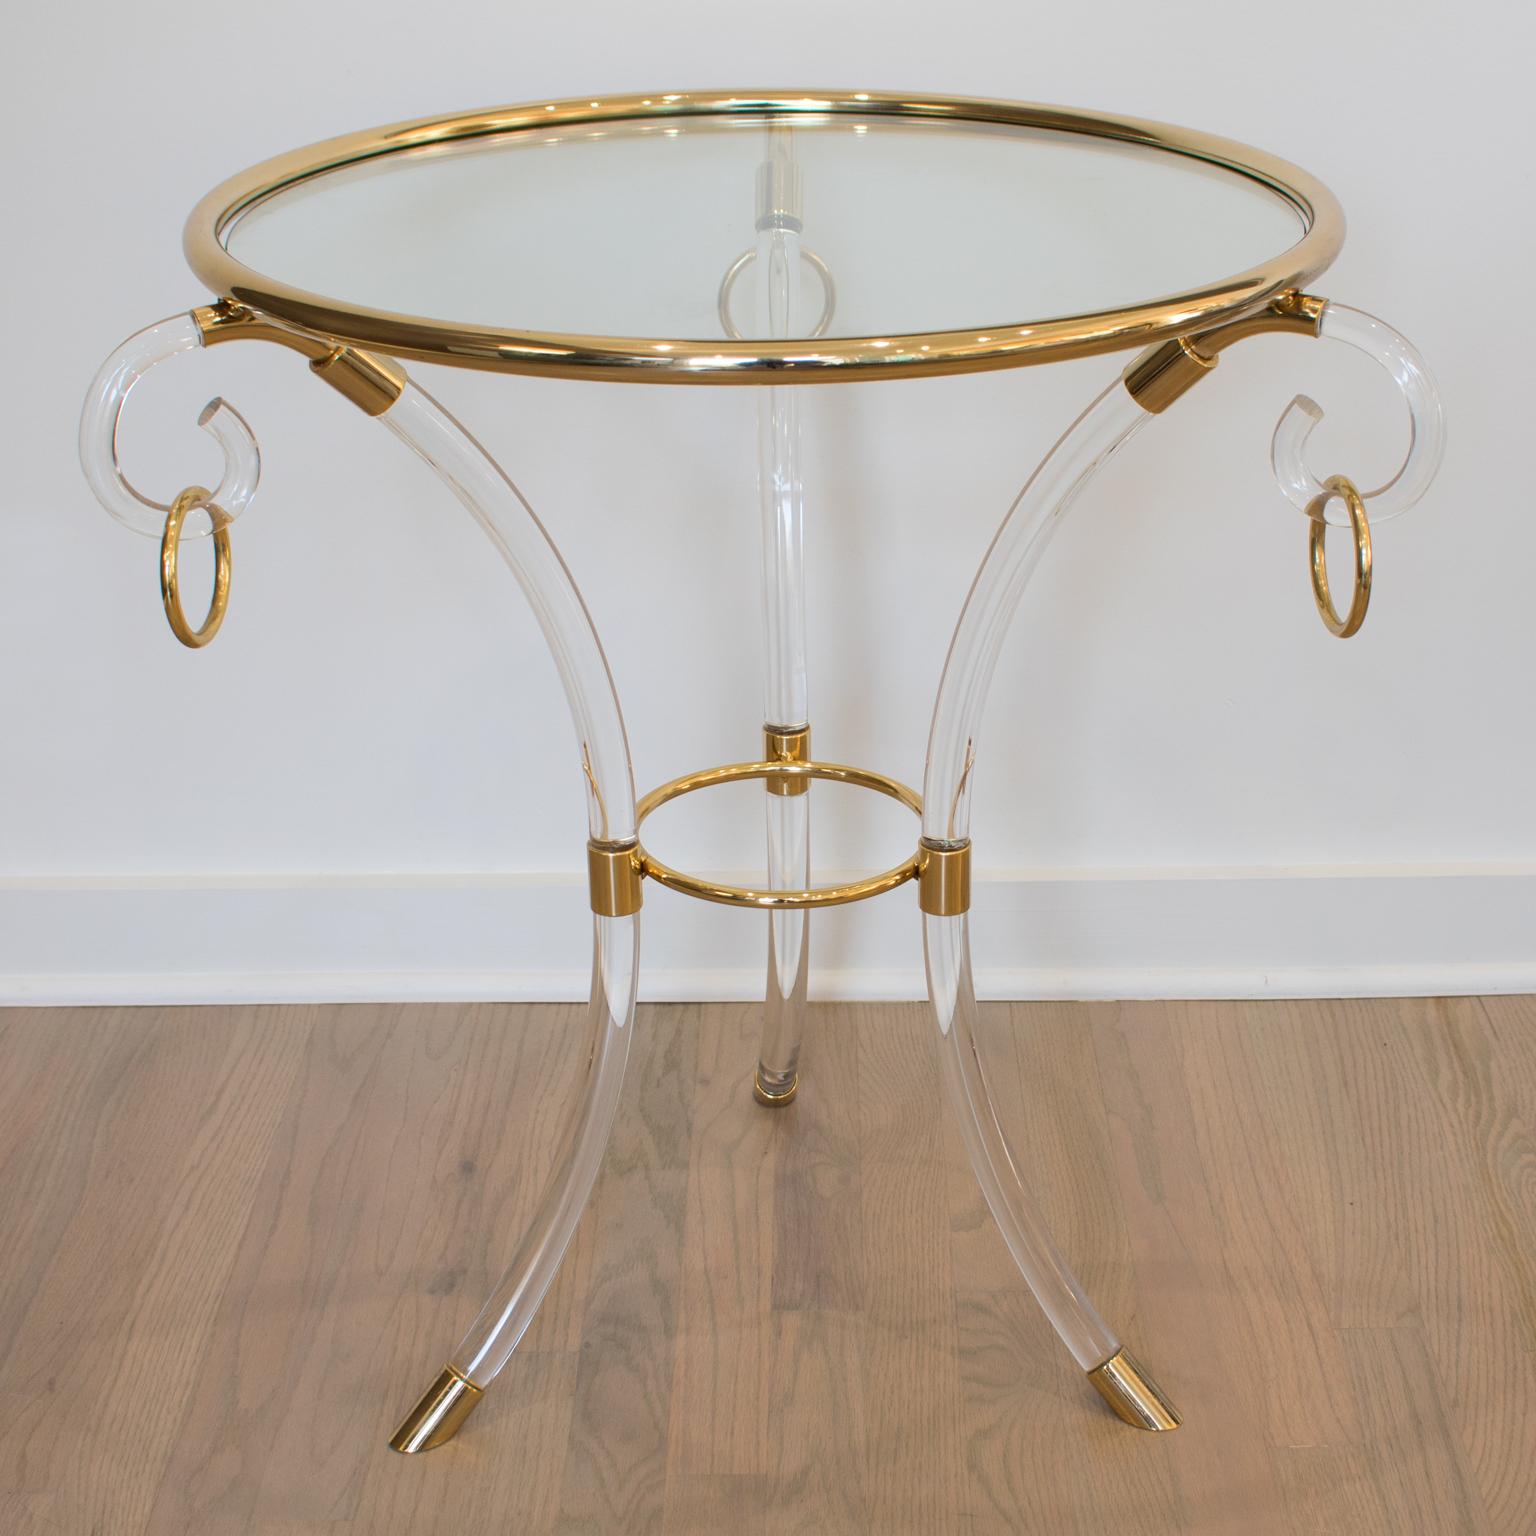 Charles Hollis Jones designed this lovely Mid-Century modernist Lucite and brass coffee or side table. The round Directoire style pedestal table has clear Lucite and gilded brass resting on three arched feet with an upper part in the form of volutes